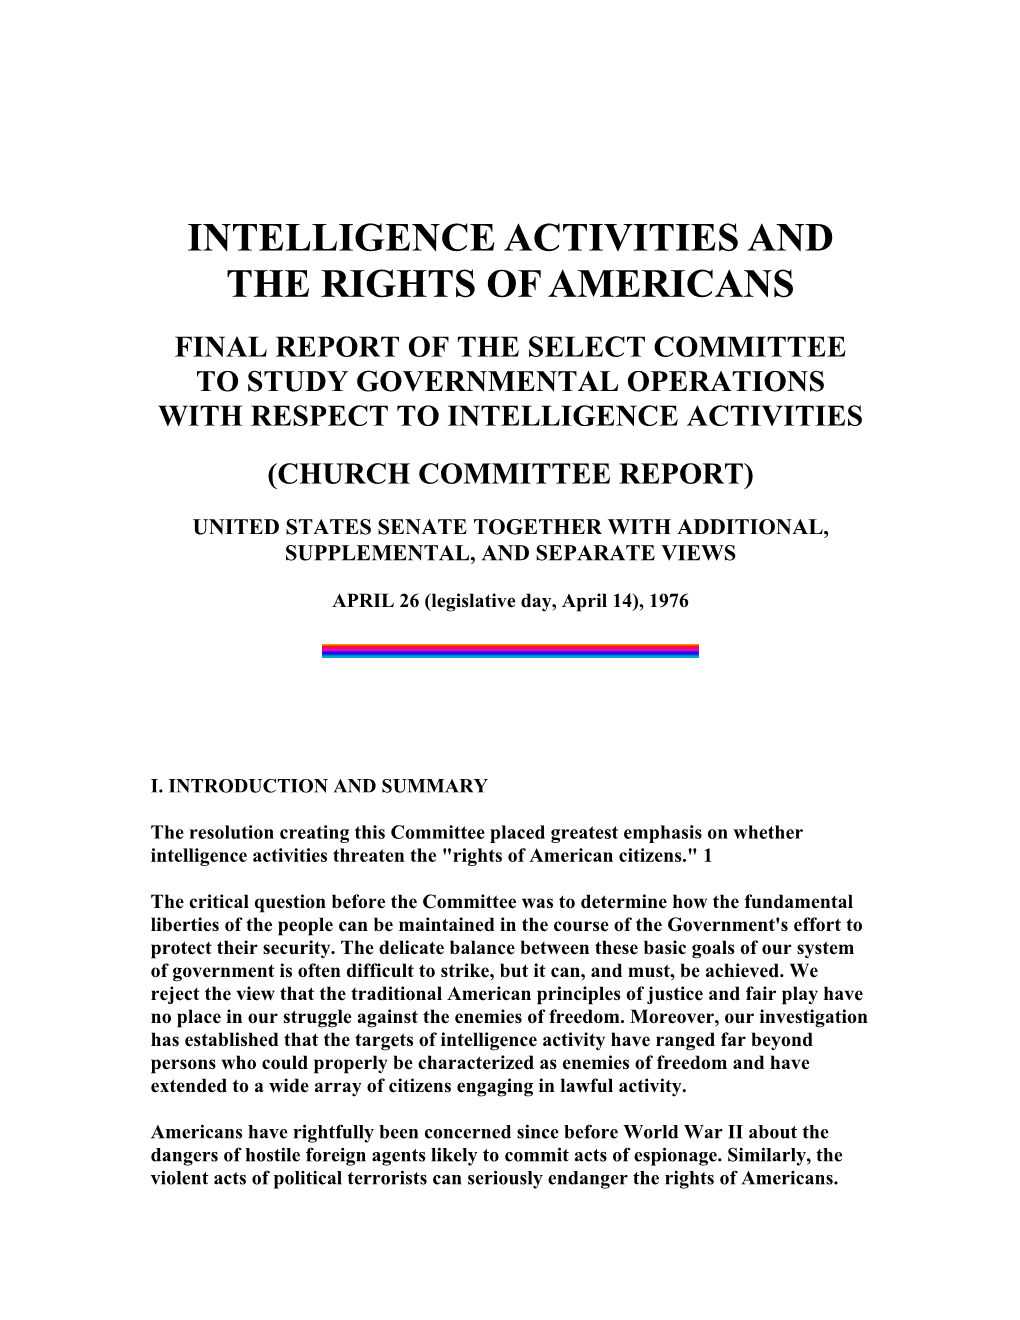 Intelligence Activities and the Rights of Americans